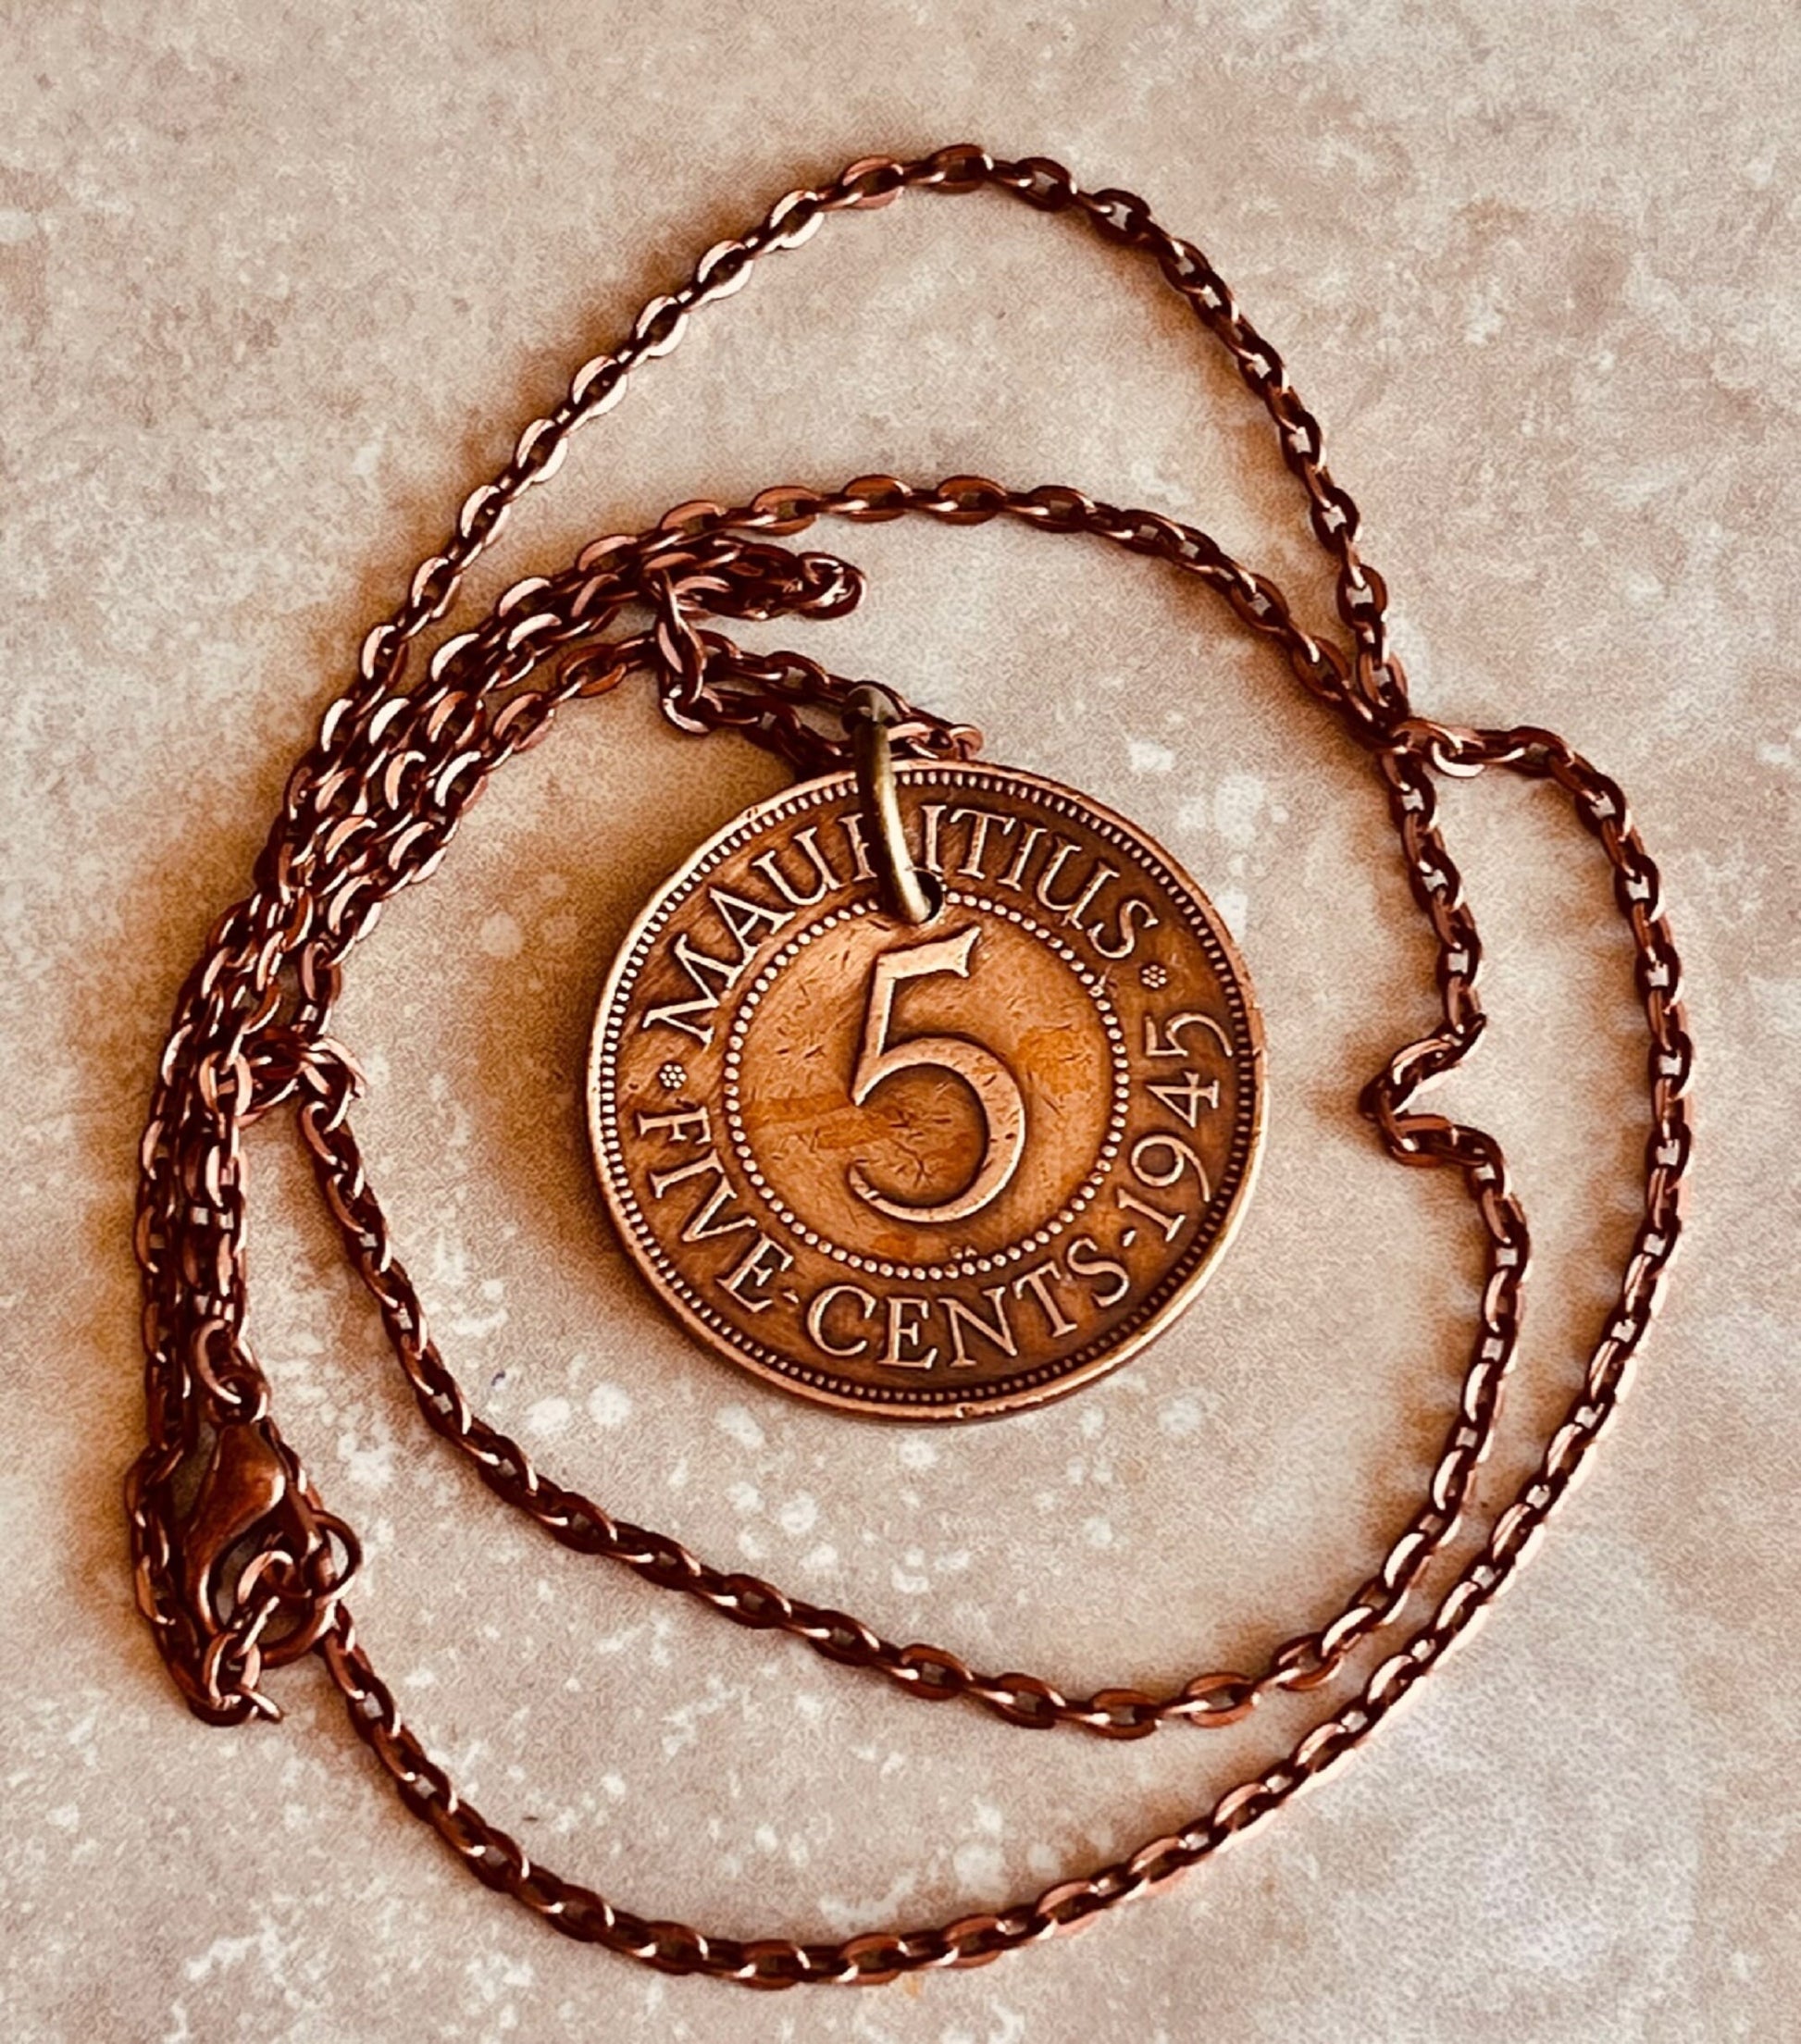 Mauritius 5 Cents Coin Pendant African Personal Necklace Vintage Handmade Jewelry Gift Friend Charm For Him Her World Coin Collector